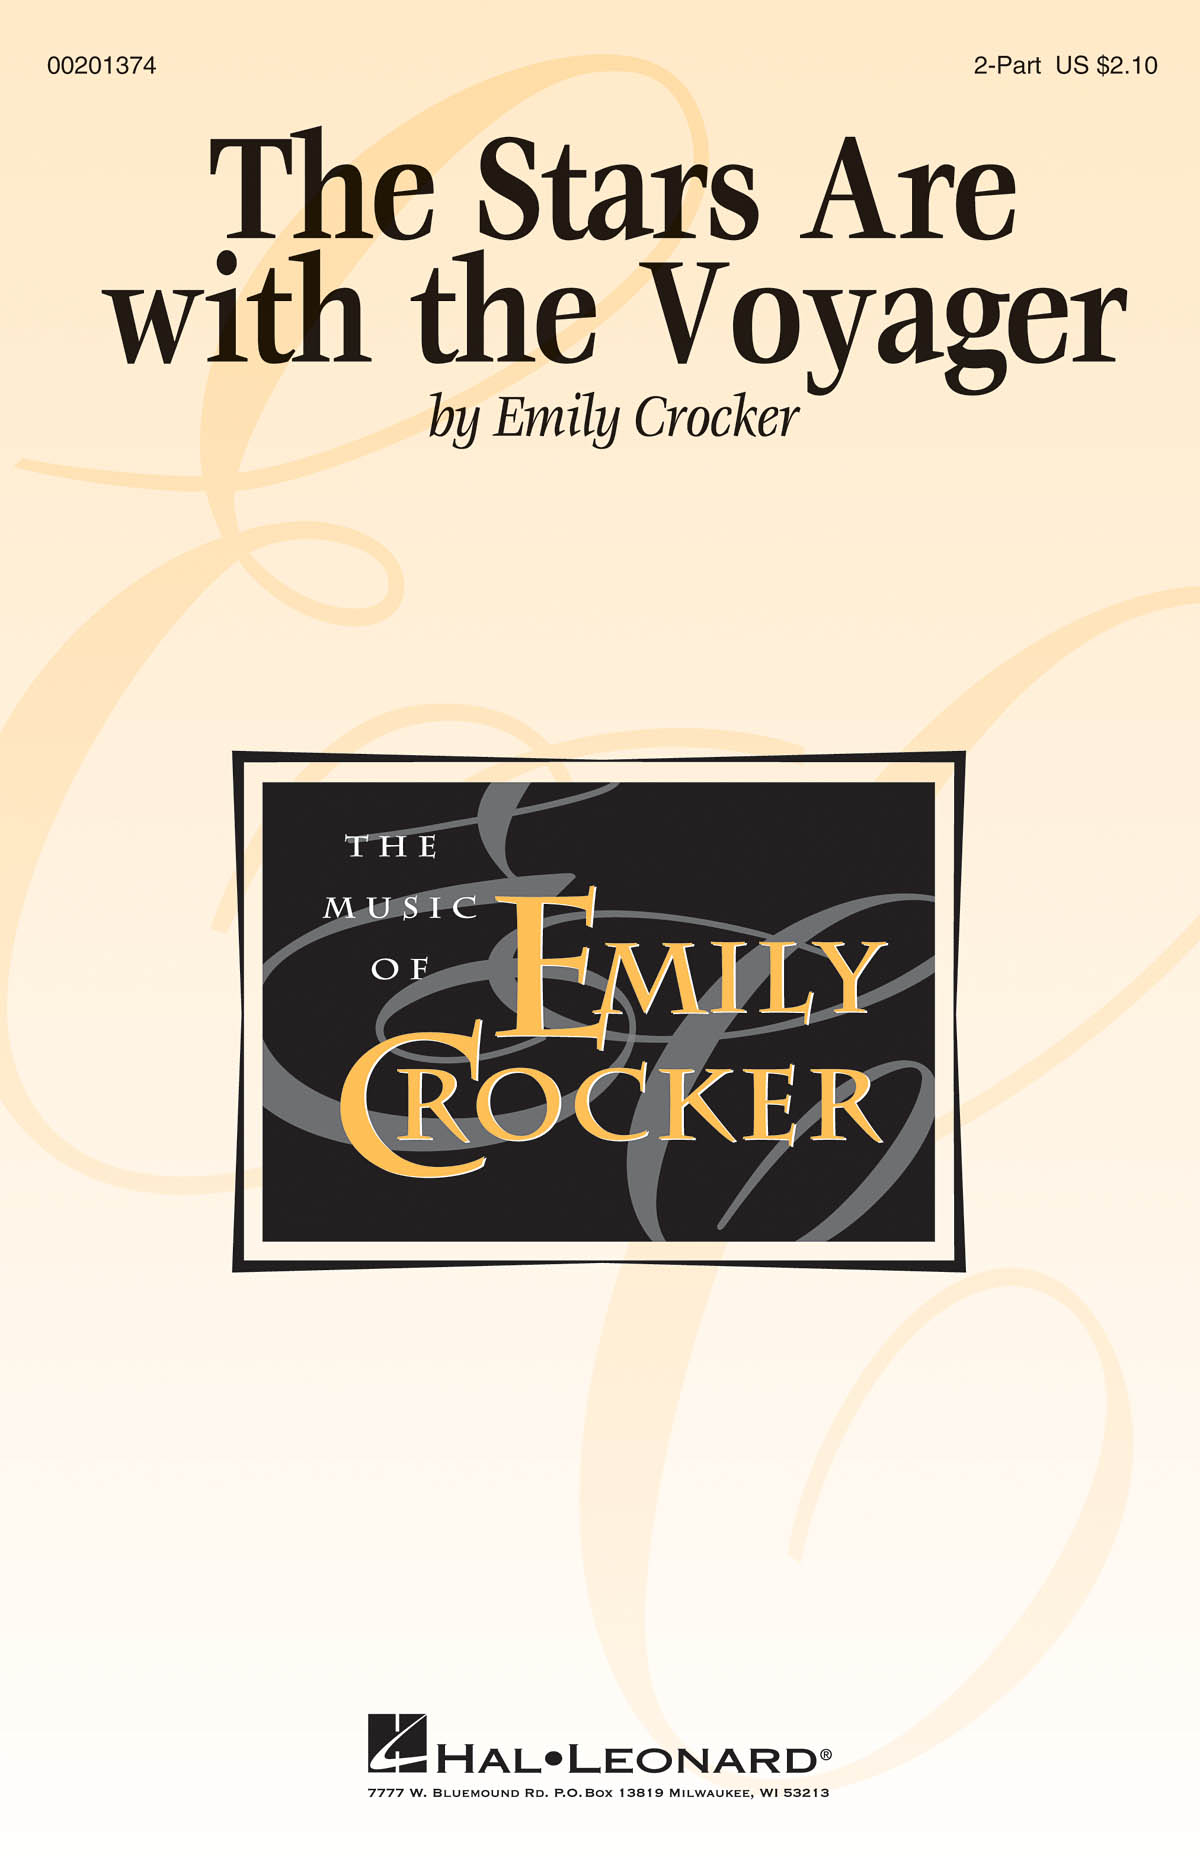 Emily Crocker: The Stars Are with the Voyager